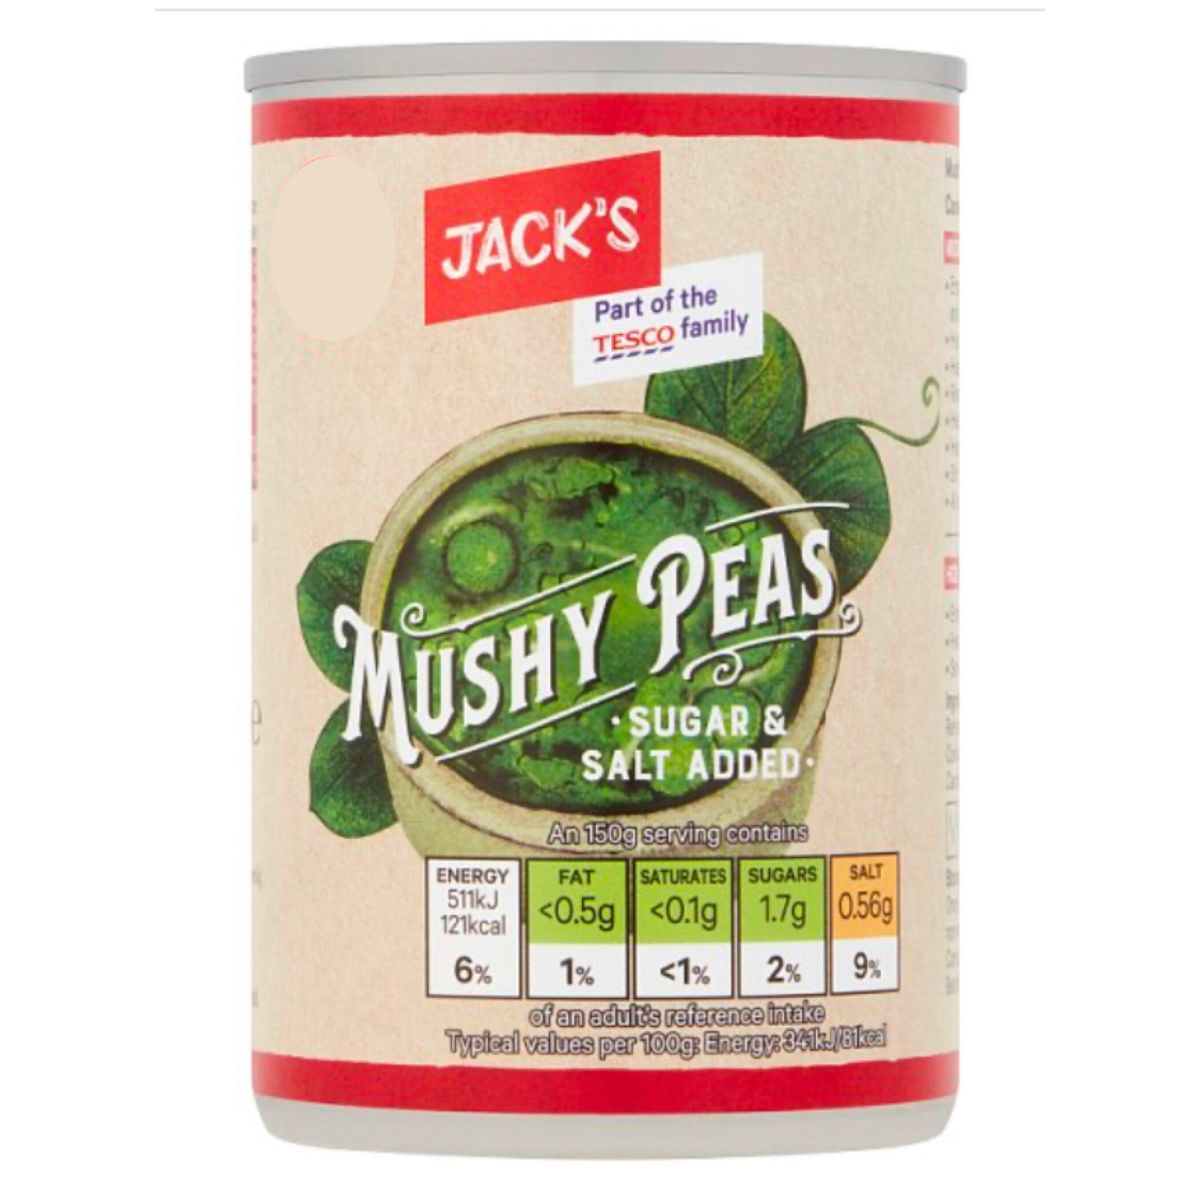 A can of Jacks - Mushy Peas - 300g with no added sugar and salt.